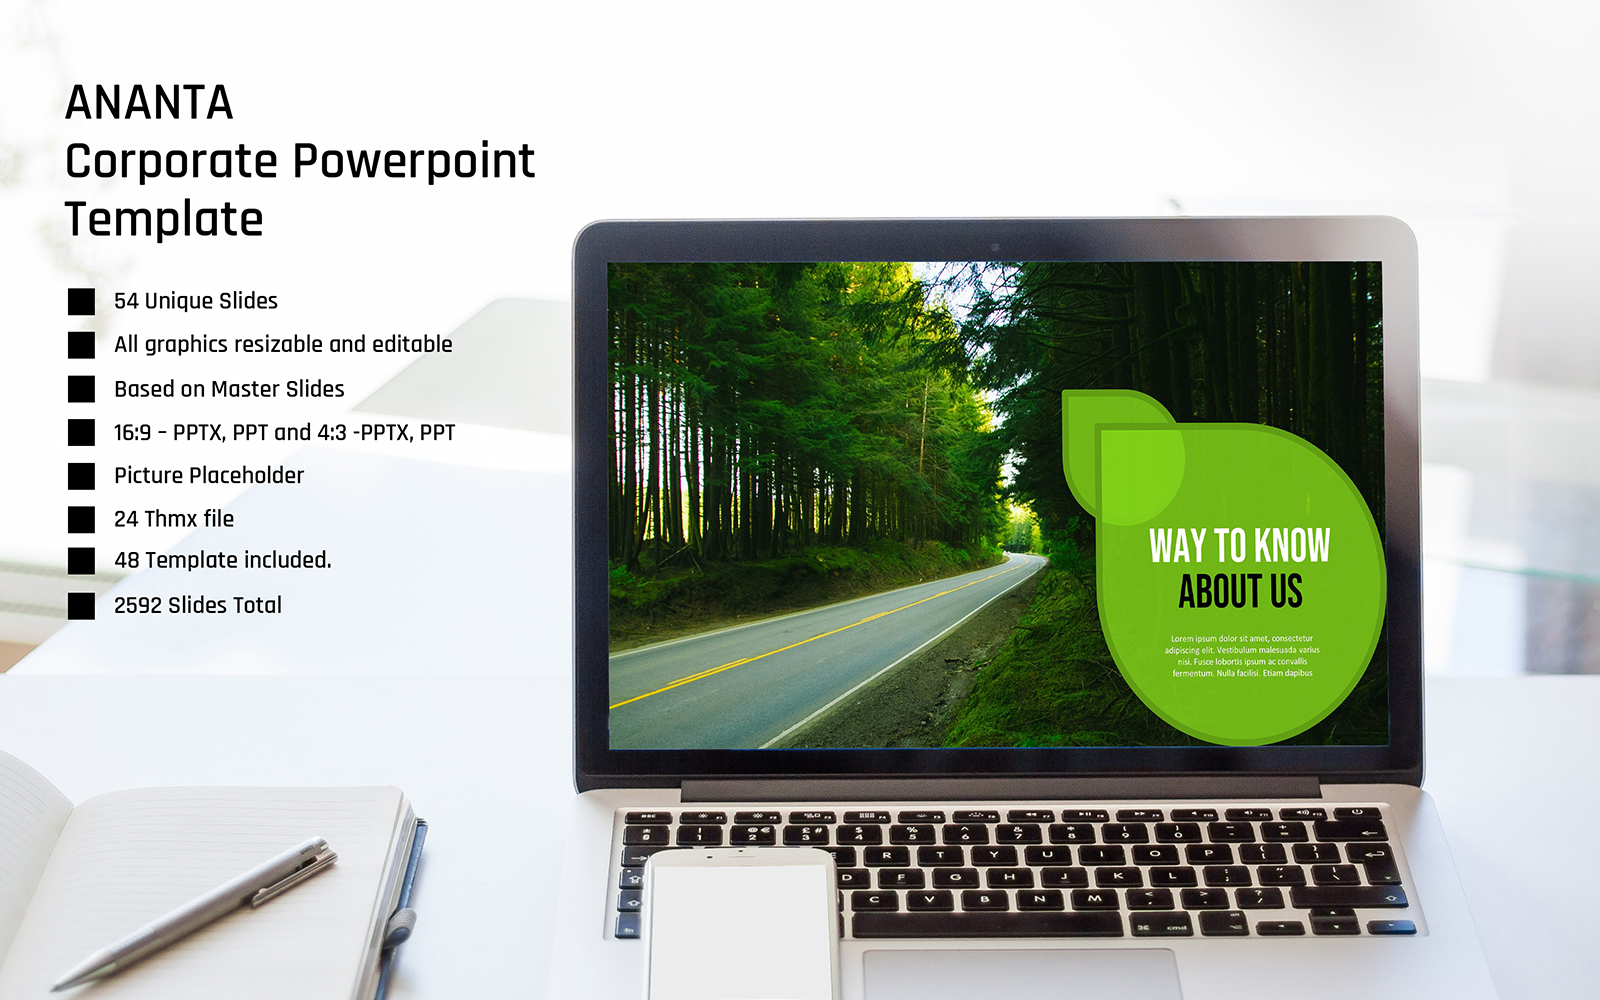 ANANTA | Corporate Powerpoint Template